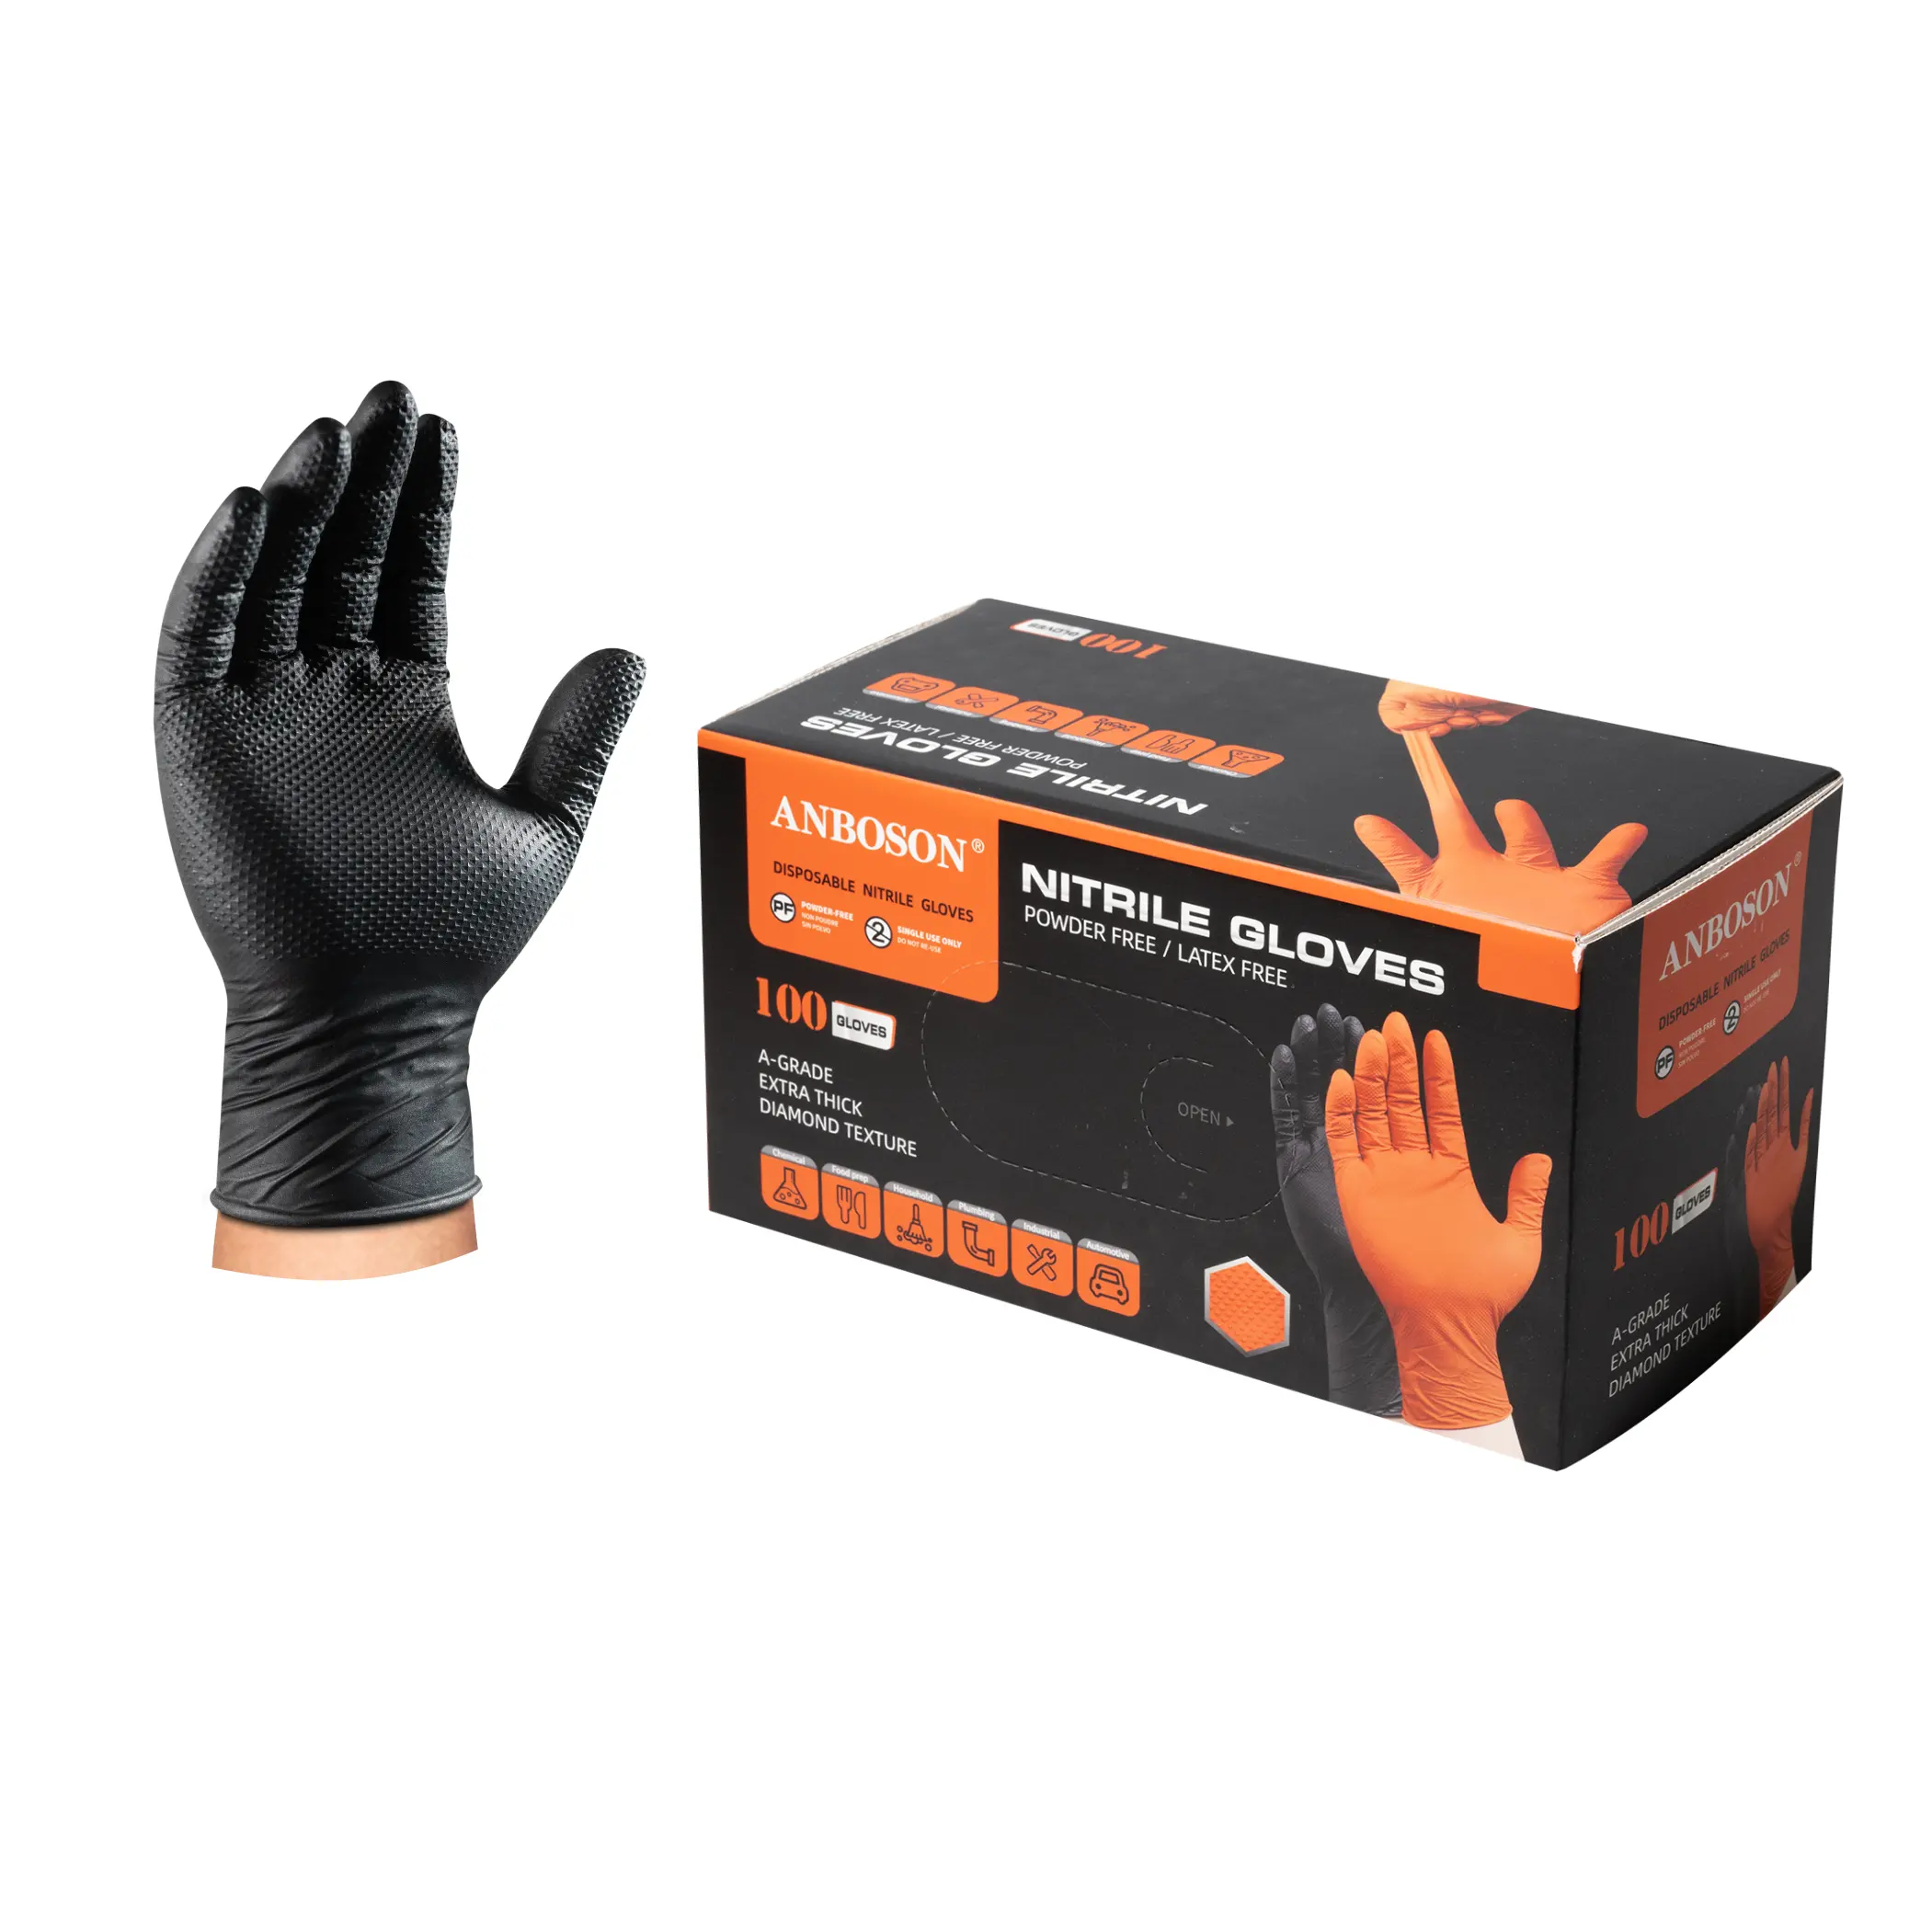 Disposable Black Diamond Nitrile Gloves Waterproof And Oil Resistant Powder Latex Free Used for Cleaning Food